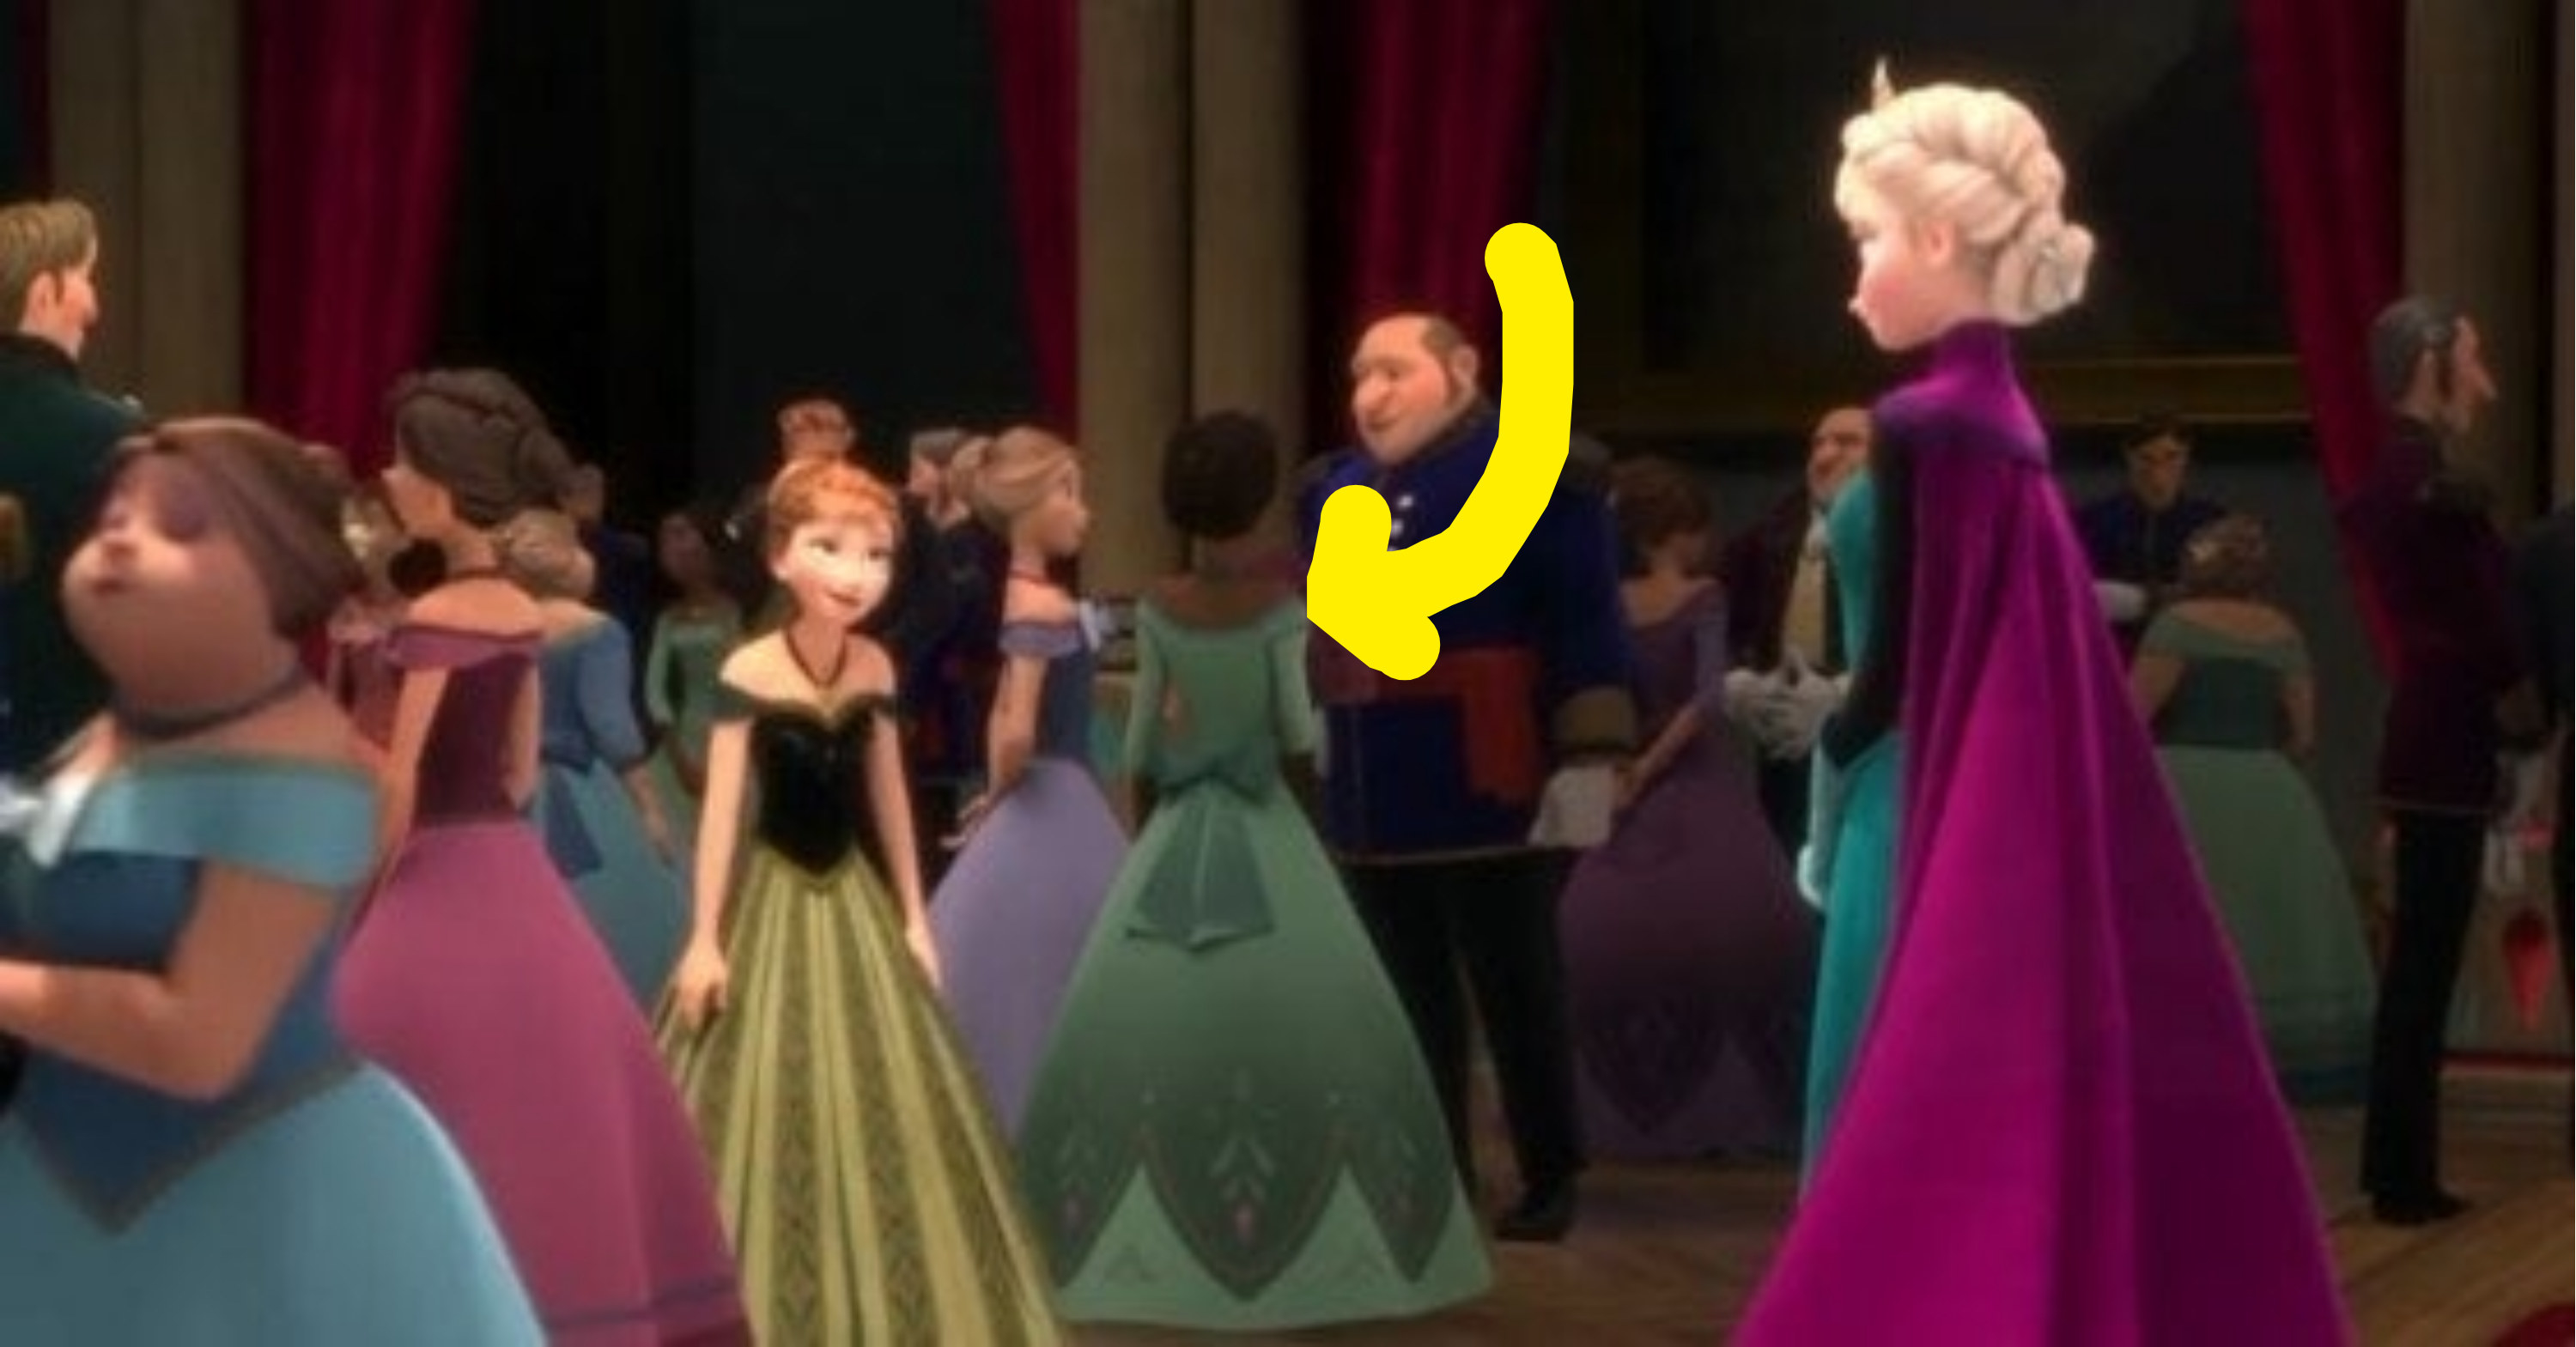 the ballroom scene from &quot;Frozen&quot; and an arrow is pointing to a possible Tiana cameo in the background of Elsa and Anna